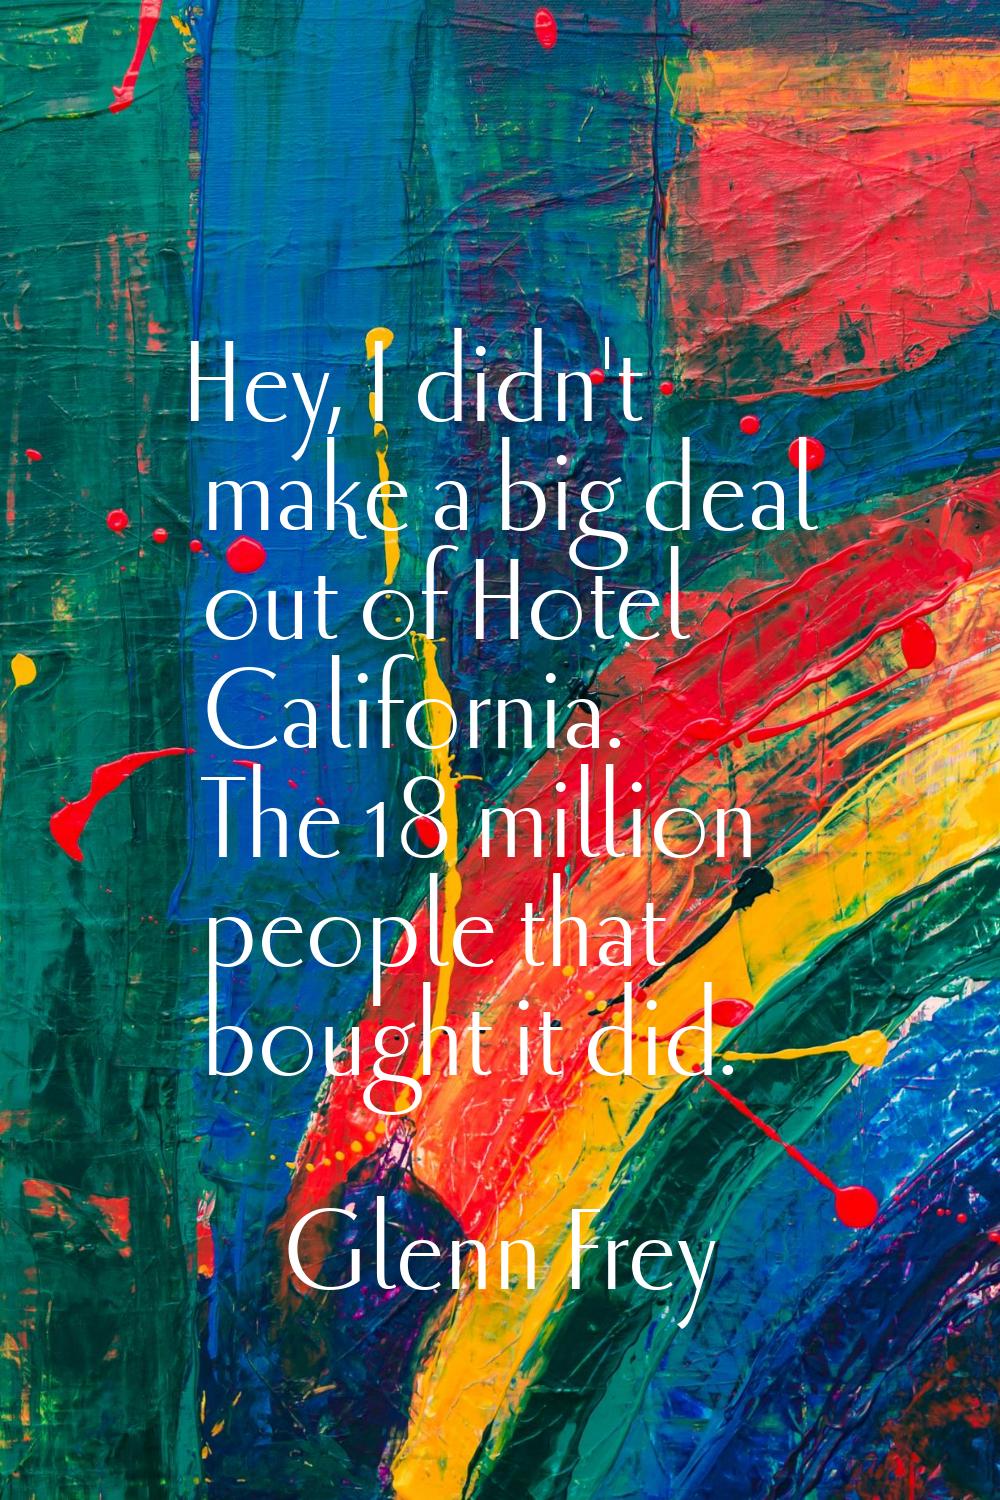 Hey, I didn't make a big deal out of Hotel California. The 18 million people that bought it did.